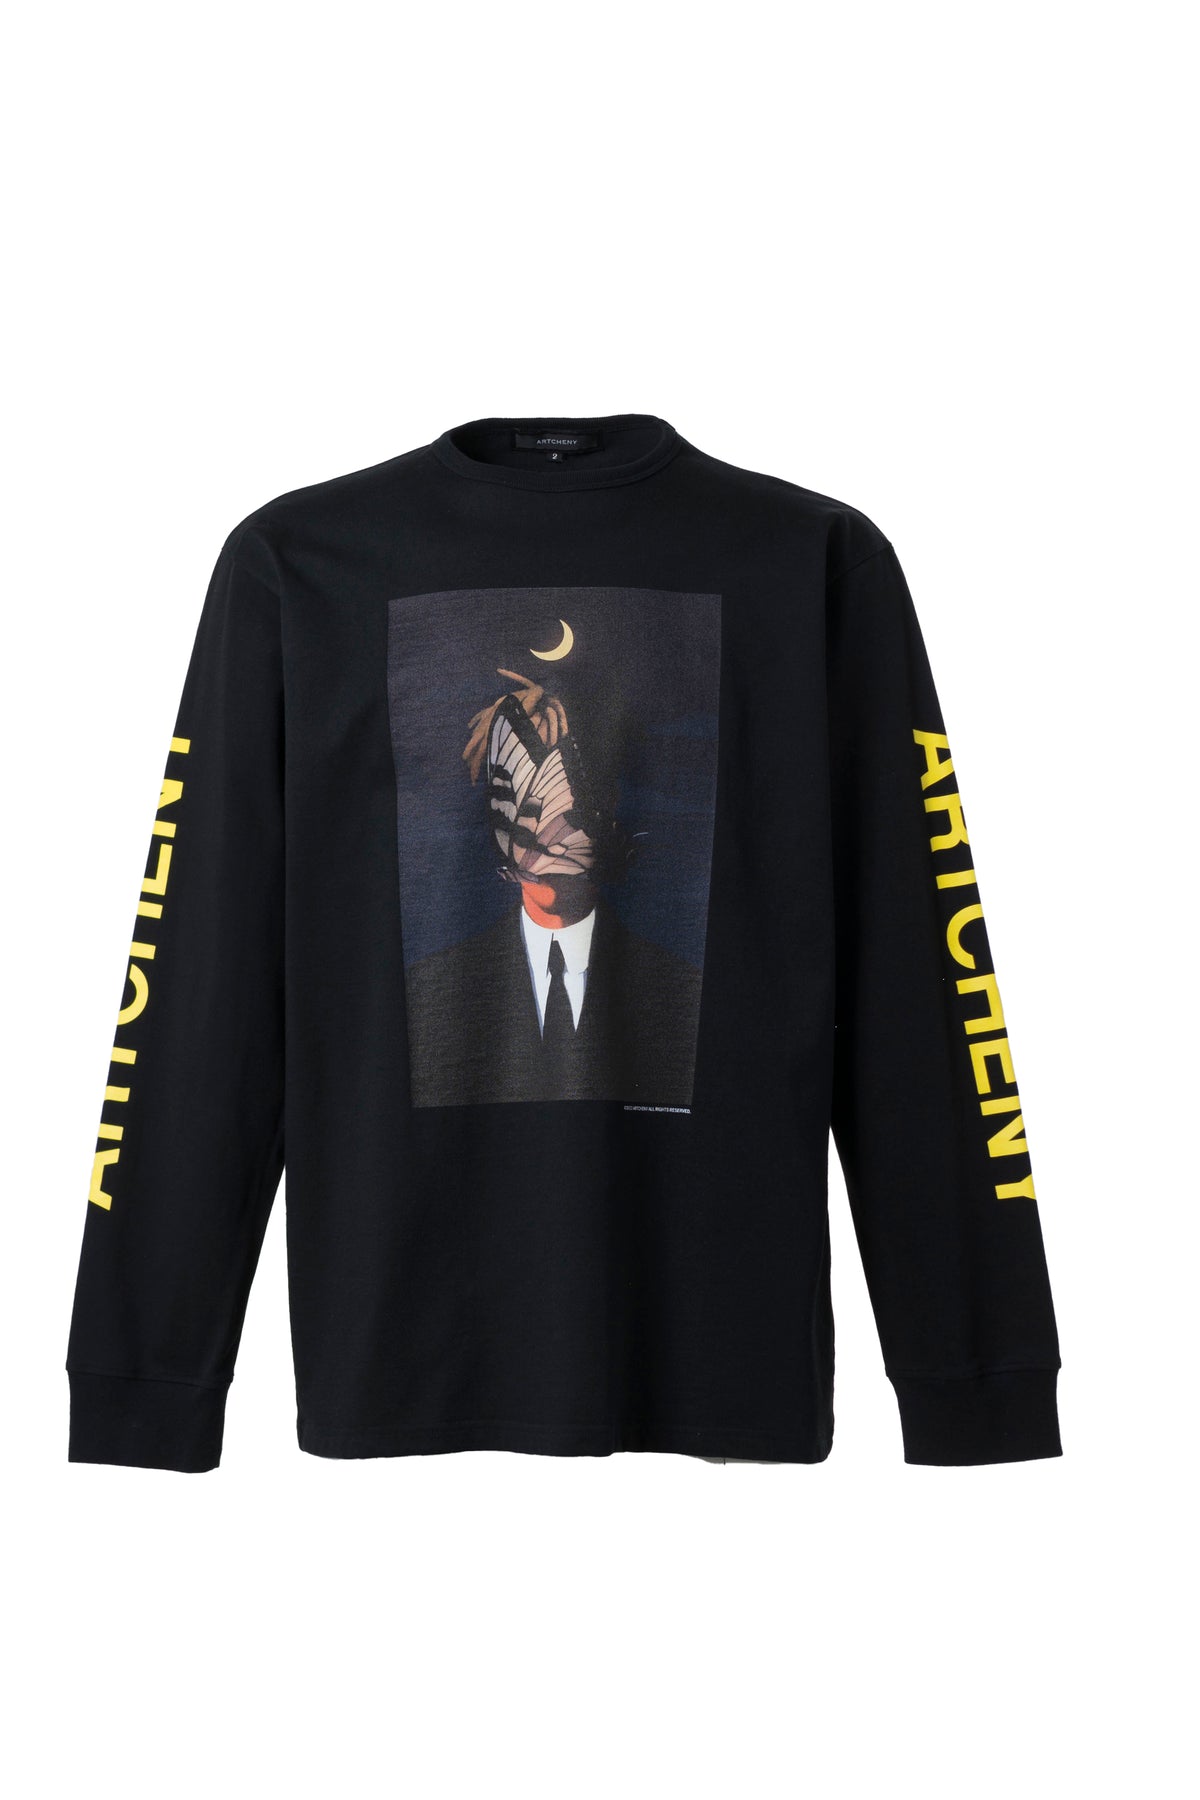 ARTCHENY LONG SLEEVE T-SHIRTS NIGHTMARE / BLK